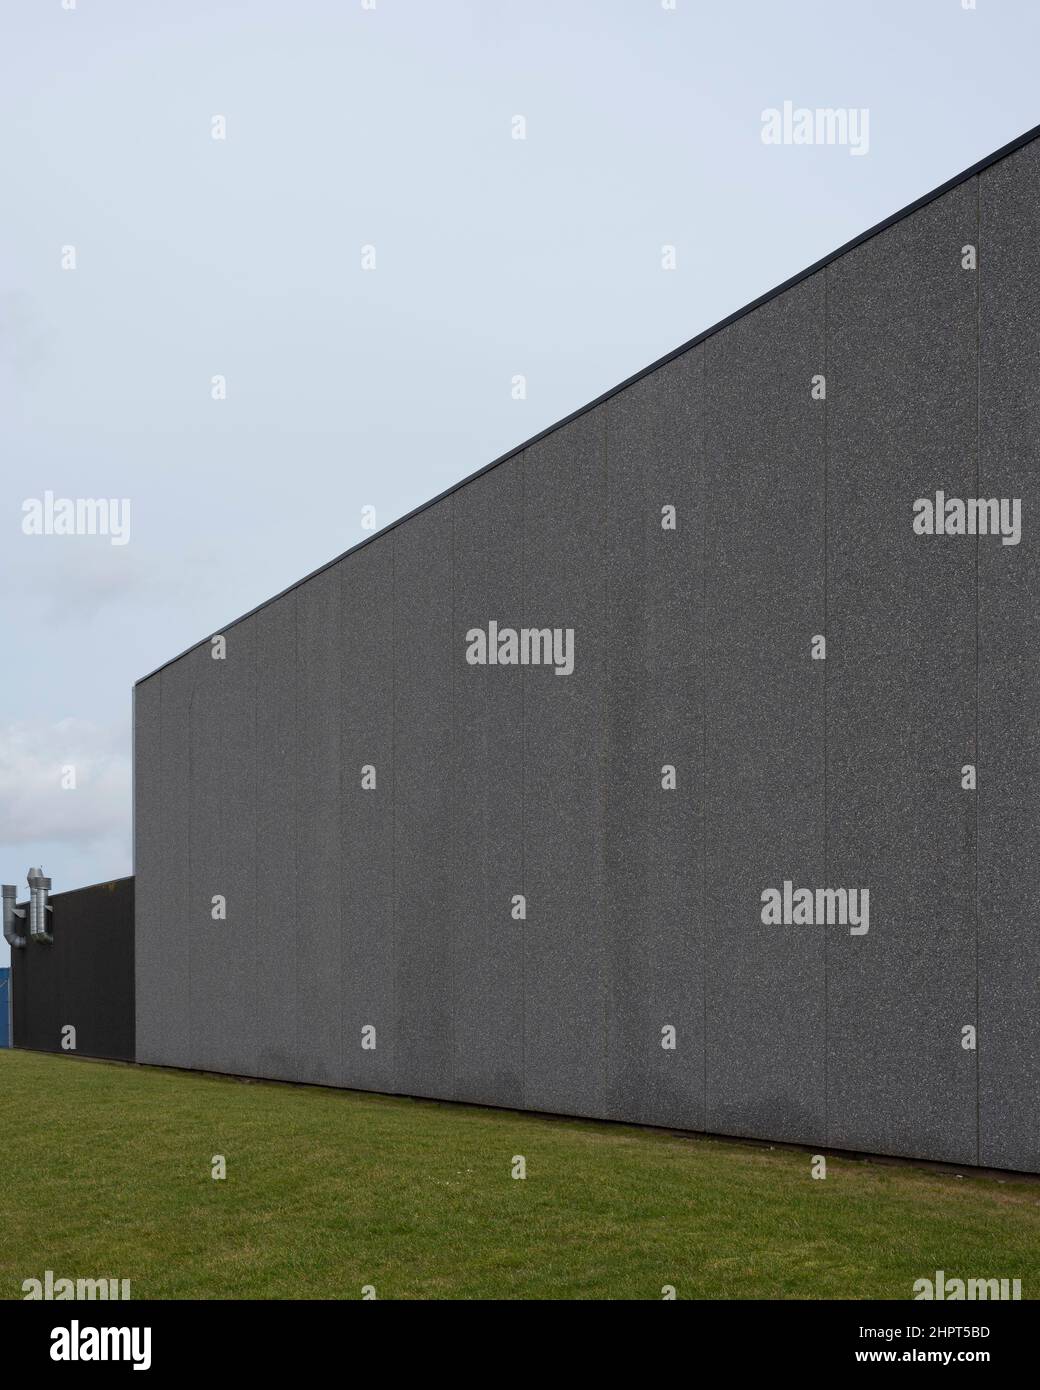 an empty gray wall on a warehouse building in gray concrete and a lawn in the foreground, Frederikssund, Denmark, February 22, 2022 Stock Photo